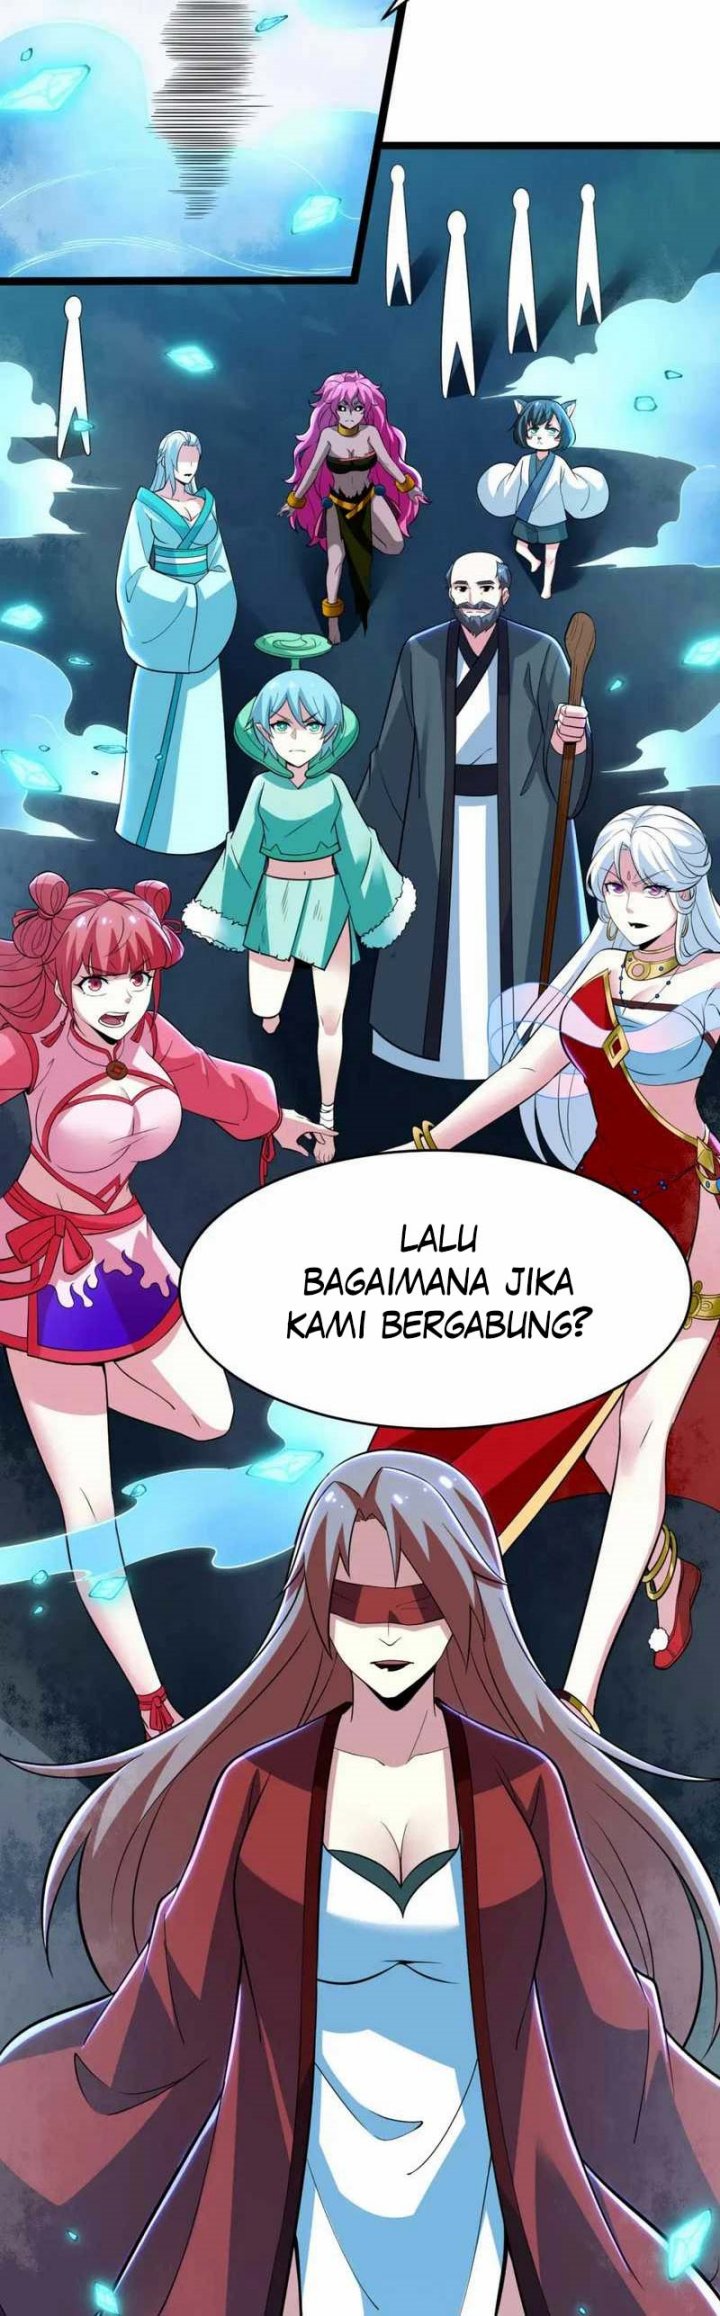 Dilarang COPAS - situs resmi www.mangacanblog.com - Komik i just want to be beaten to death by everyone 186 - chapter 186 187 Indonesia i just want to be beaten to death by everyone 186 - chapter 186 Terbaru 17|Baca Manga Komik Indonesia|Mangacan